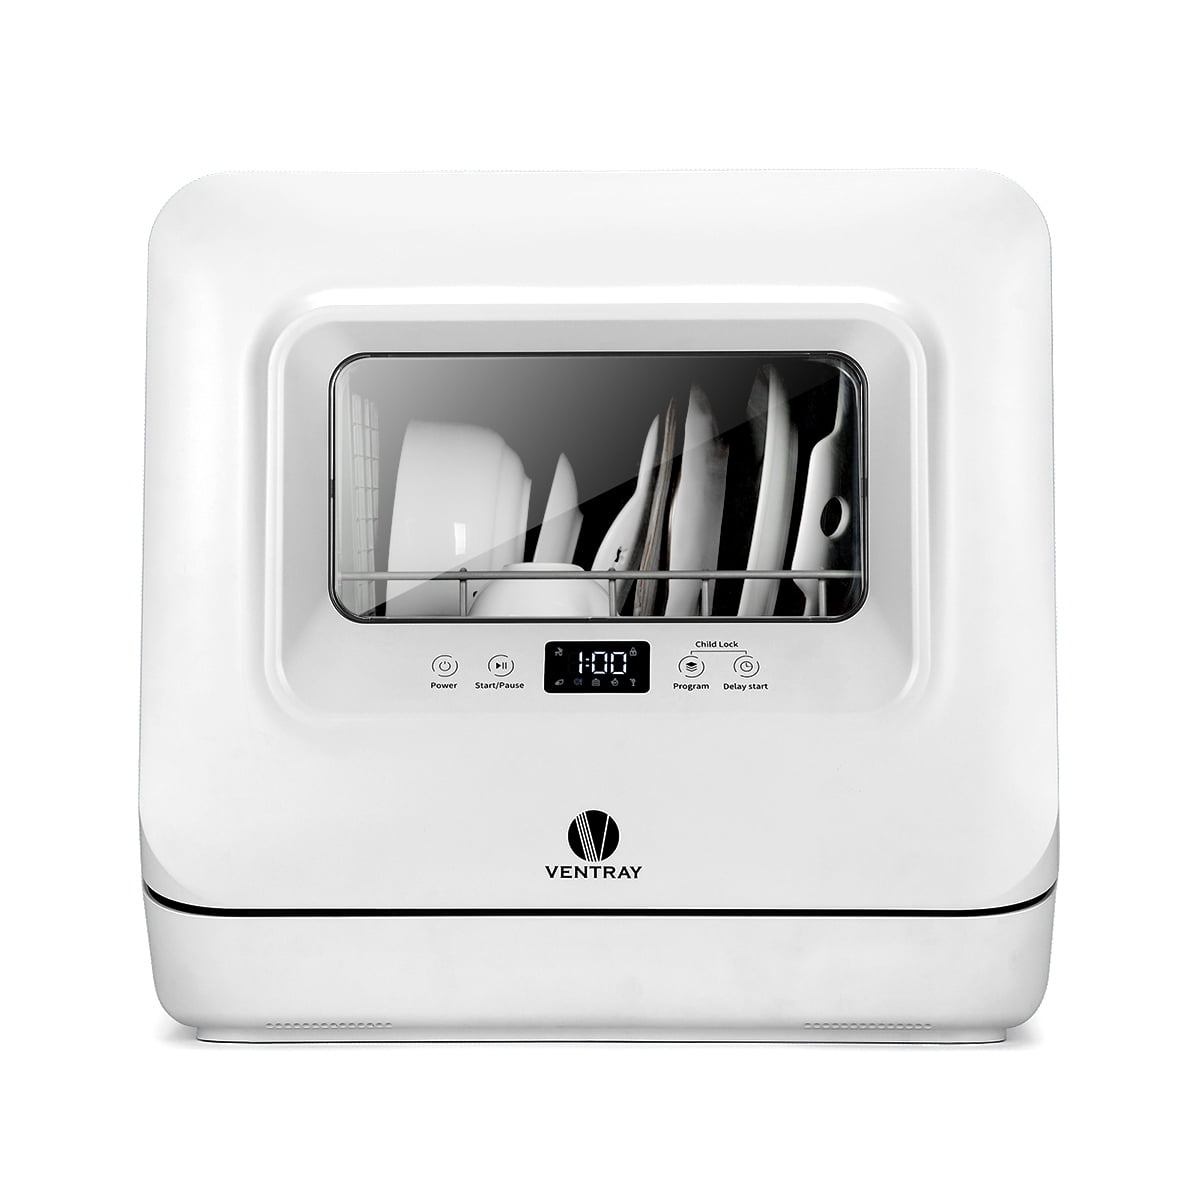 Fruit Washing Hot Air-dry Storage White 5-Liter Built-in Water Tank Compact Portable Countertop Dishwasher 360° Streak-Free Deep Cleaning with Baby Care Portable Dishwasher 